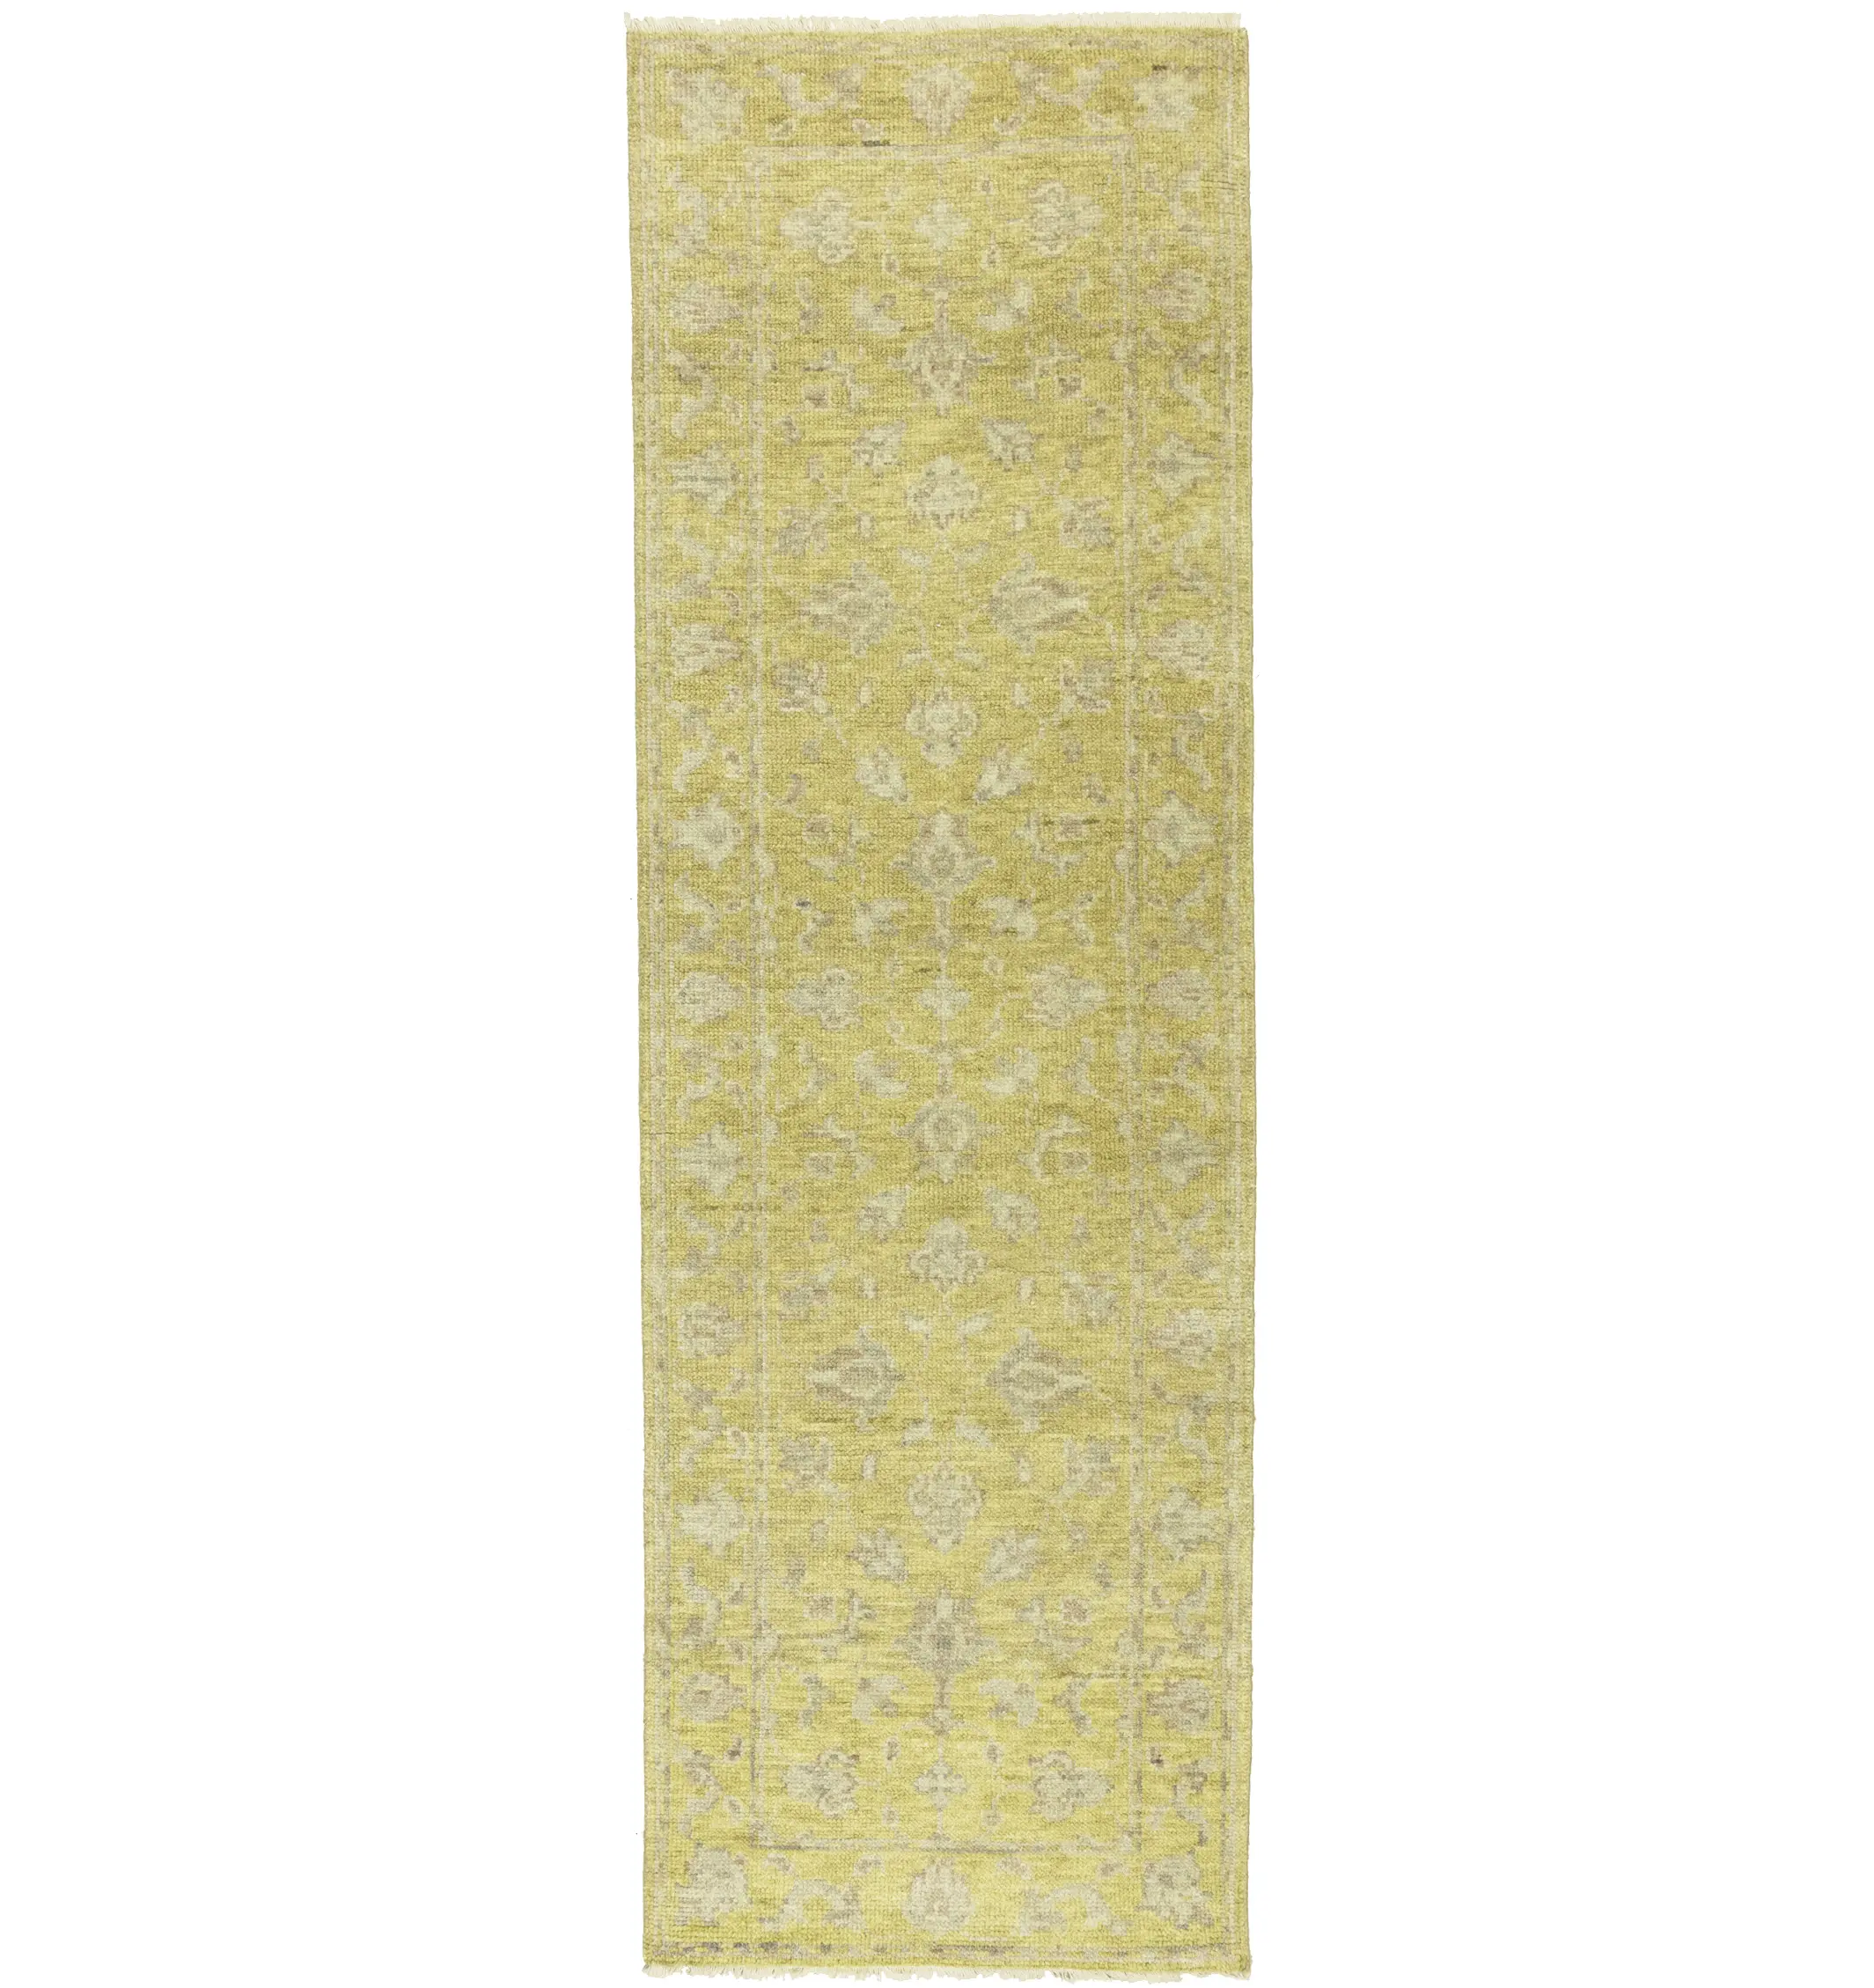 Muted Golden Yellow Floral 3X8 Transitional Oriental Runner Rug